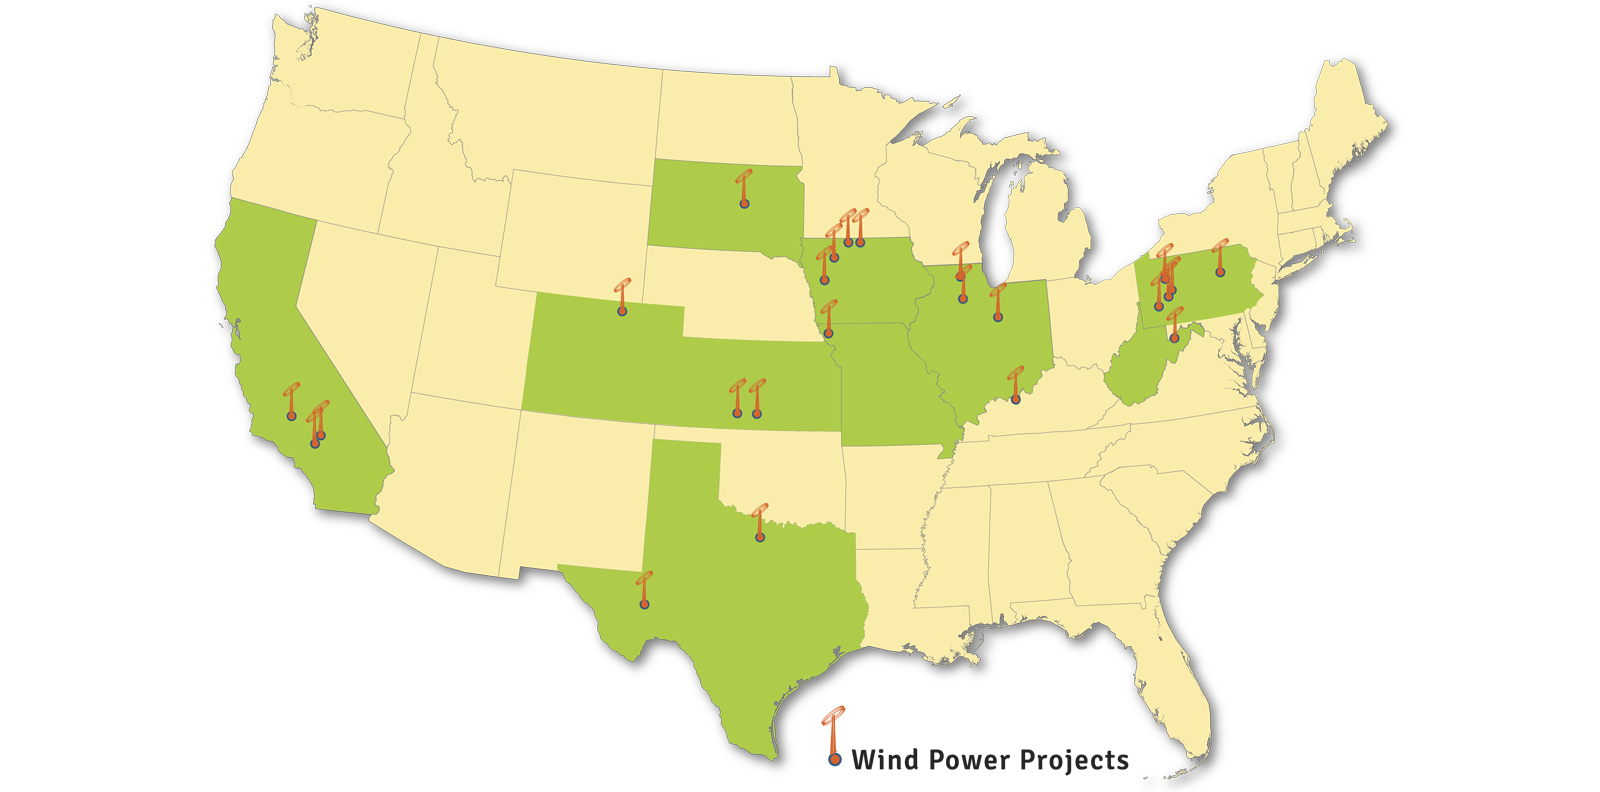 Map of Tempest Group's wind power projects